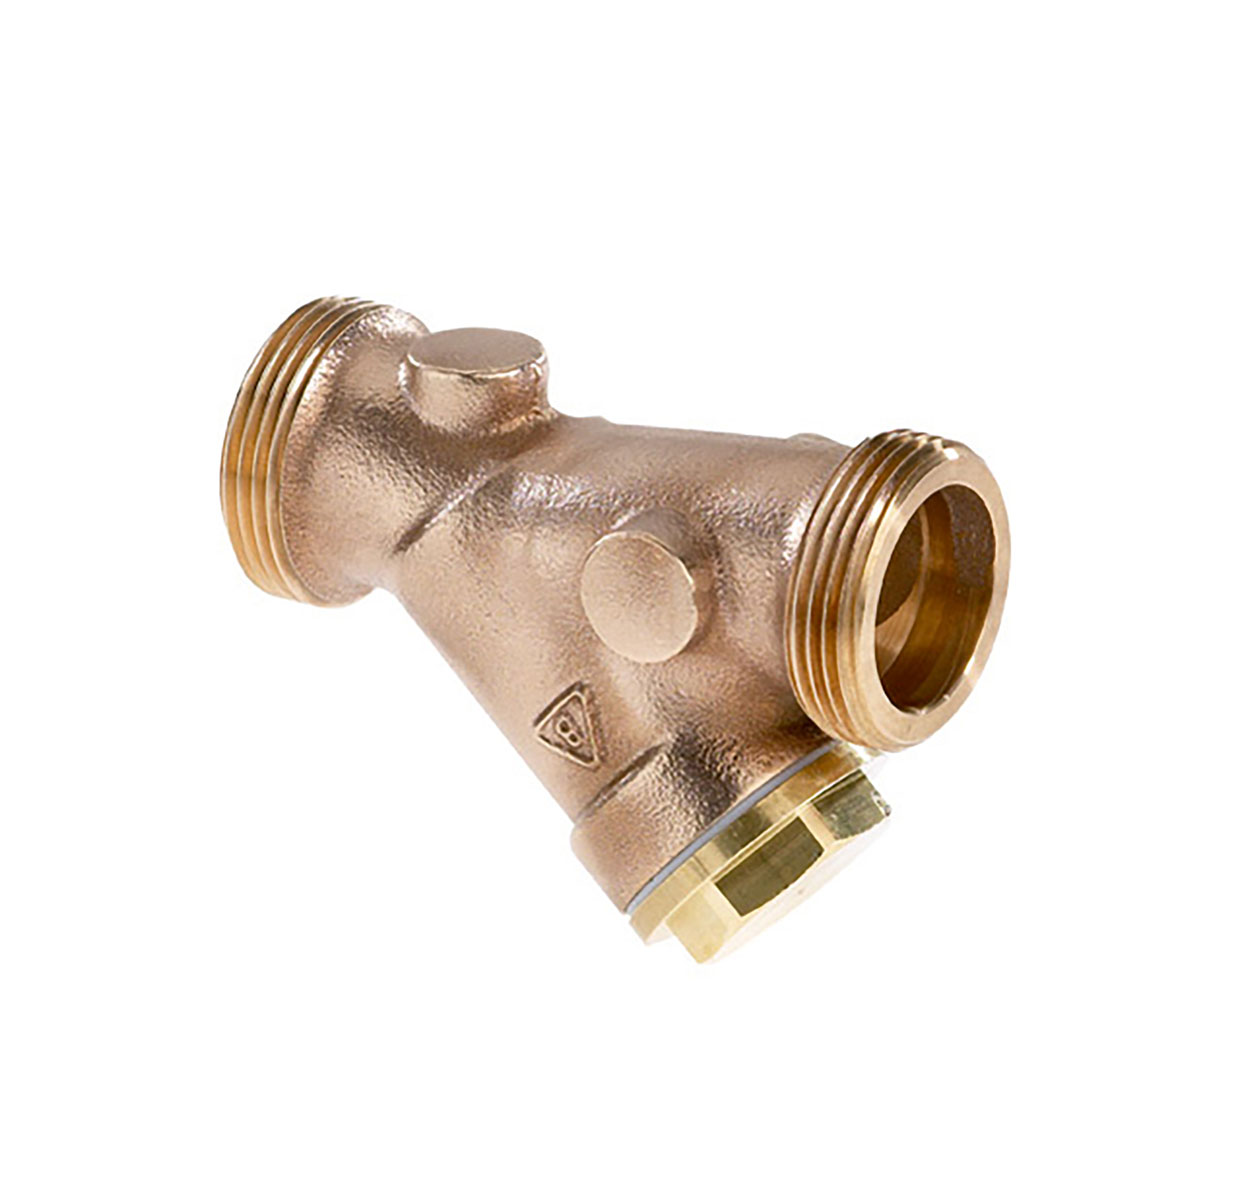 2452500 - Red-brass Strainer Strainer with PTFE-sealing (Teflon)